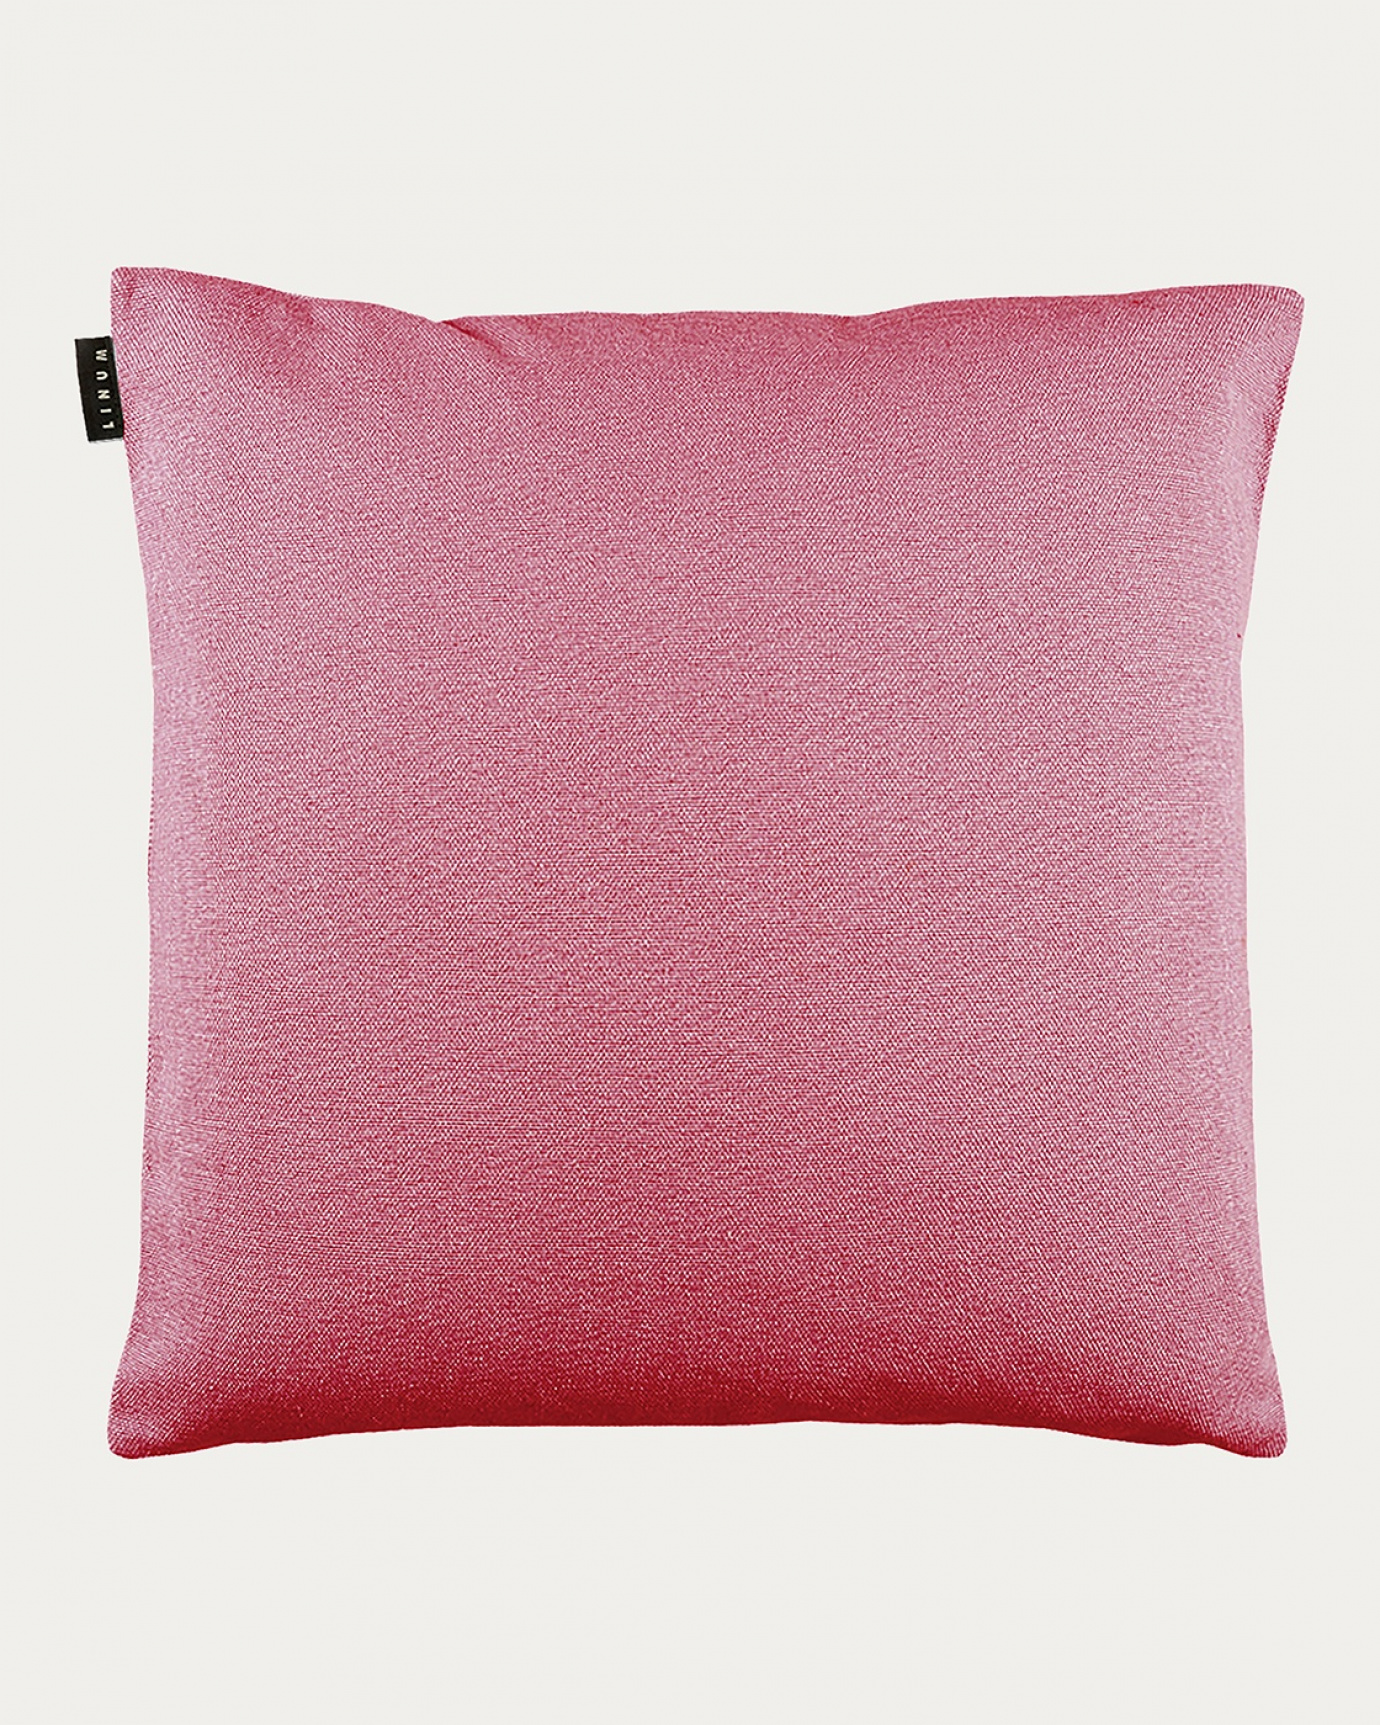 Product image cerise red PEPPER cushion cover made of soft cotton from LINUM DESIGN. Easy to wash and durable for generations. Size 60x60 cm.